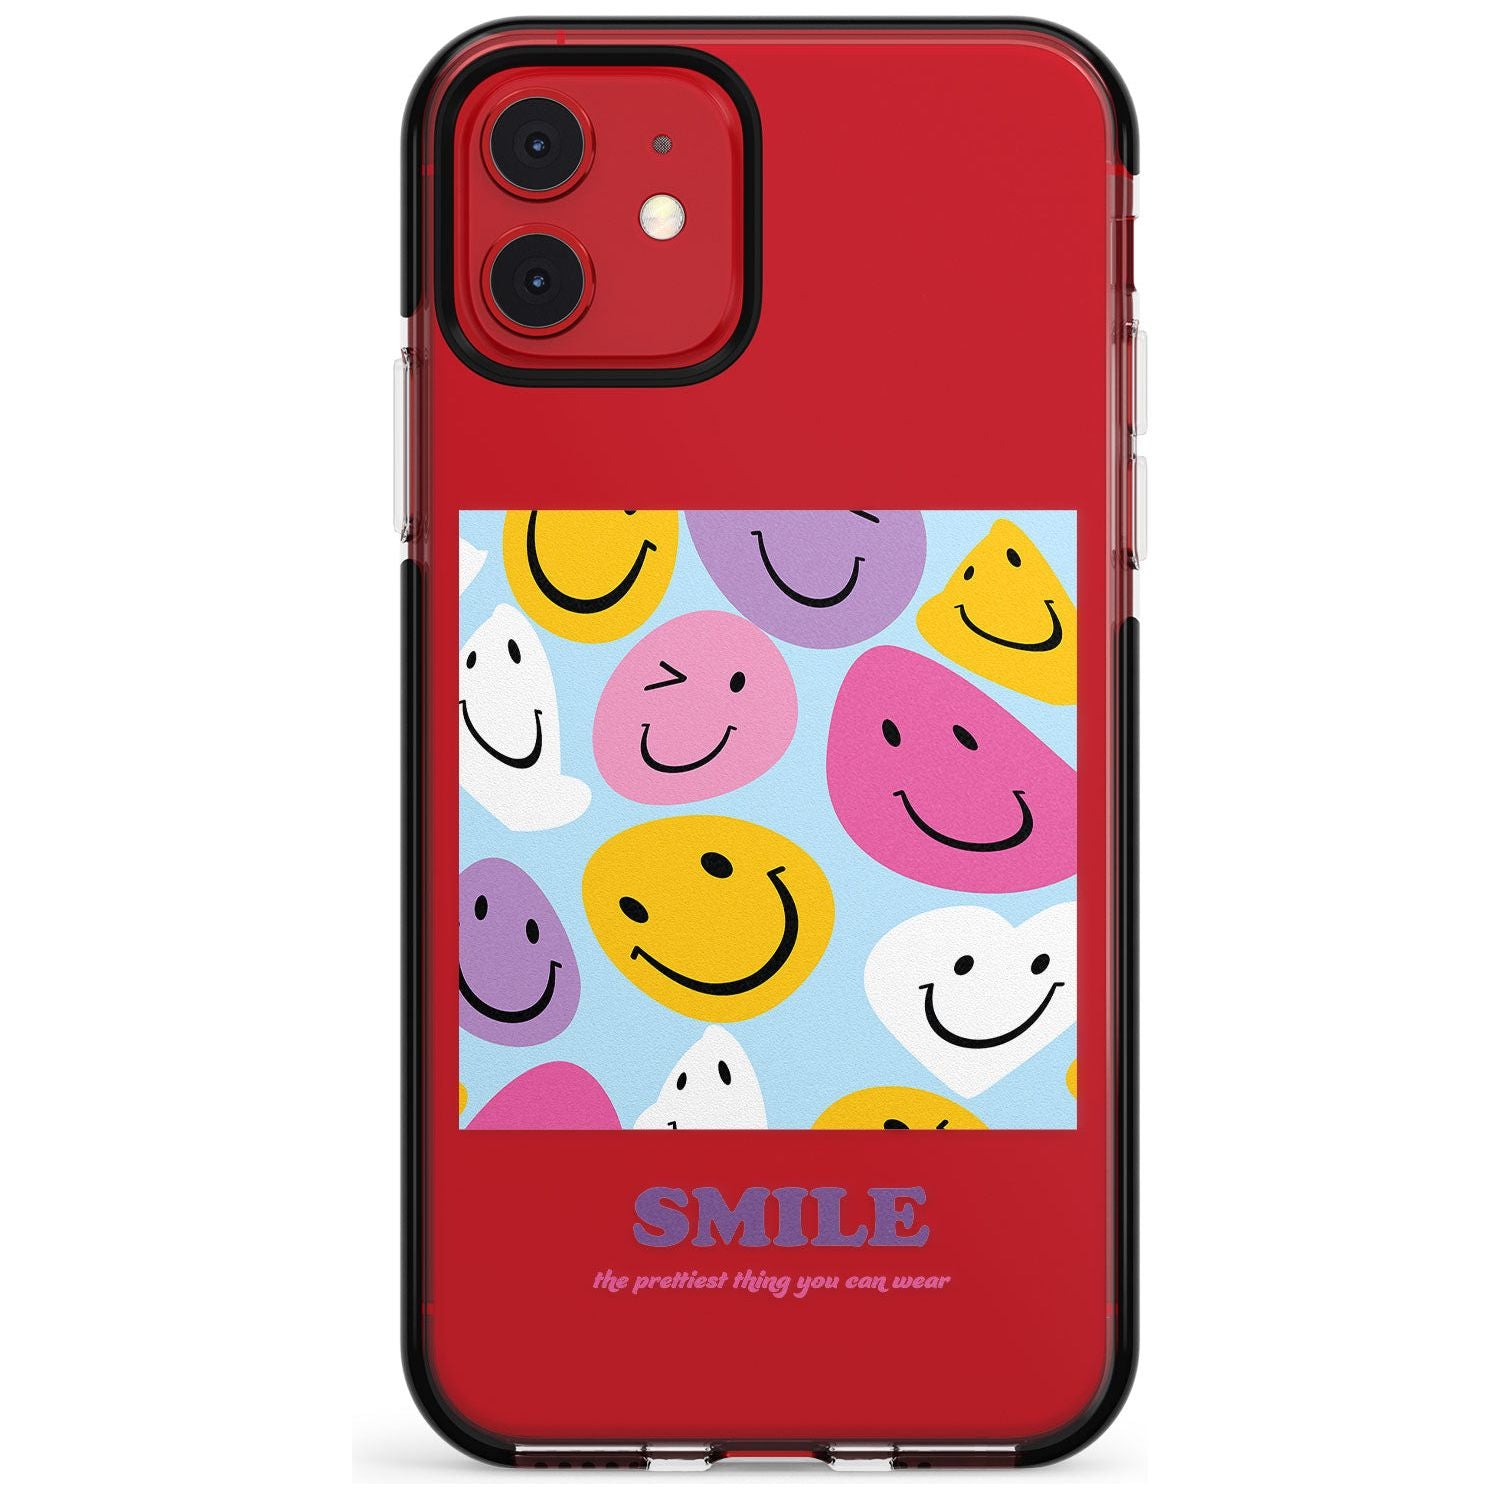 A Smile Black Impact Phone Case for iPhone 11 Pro Max